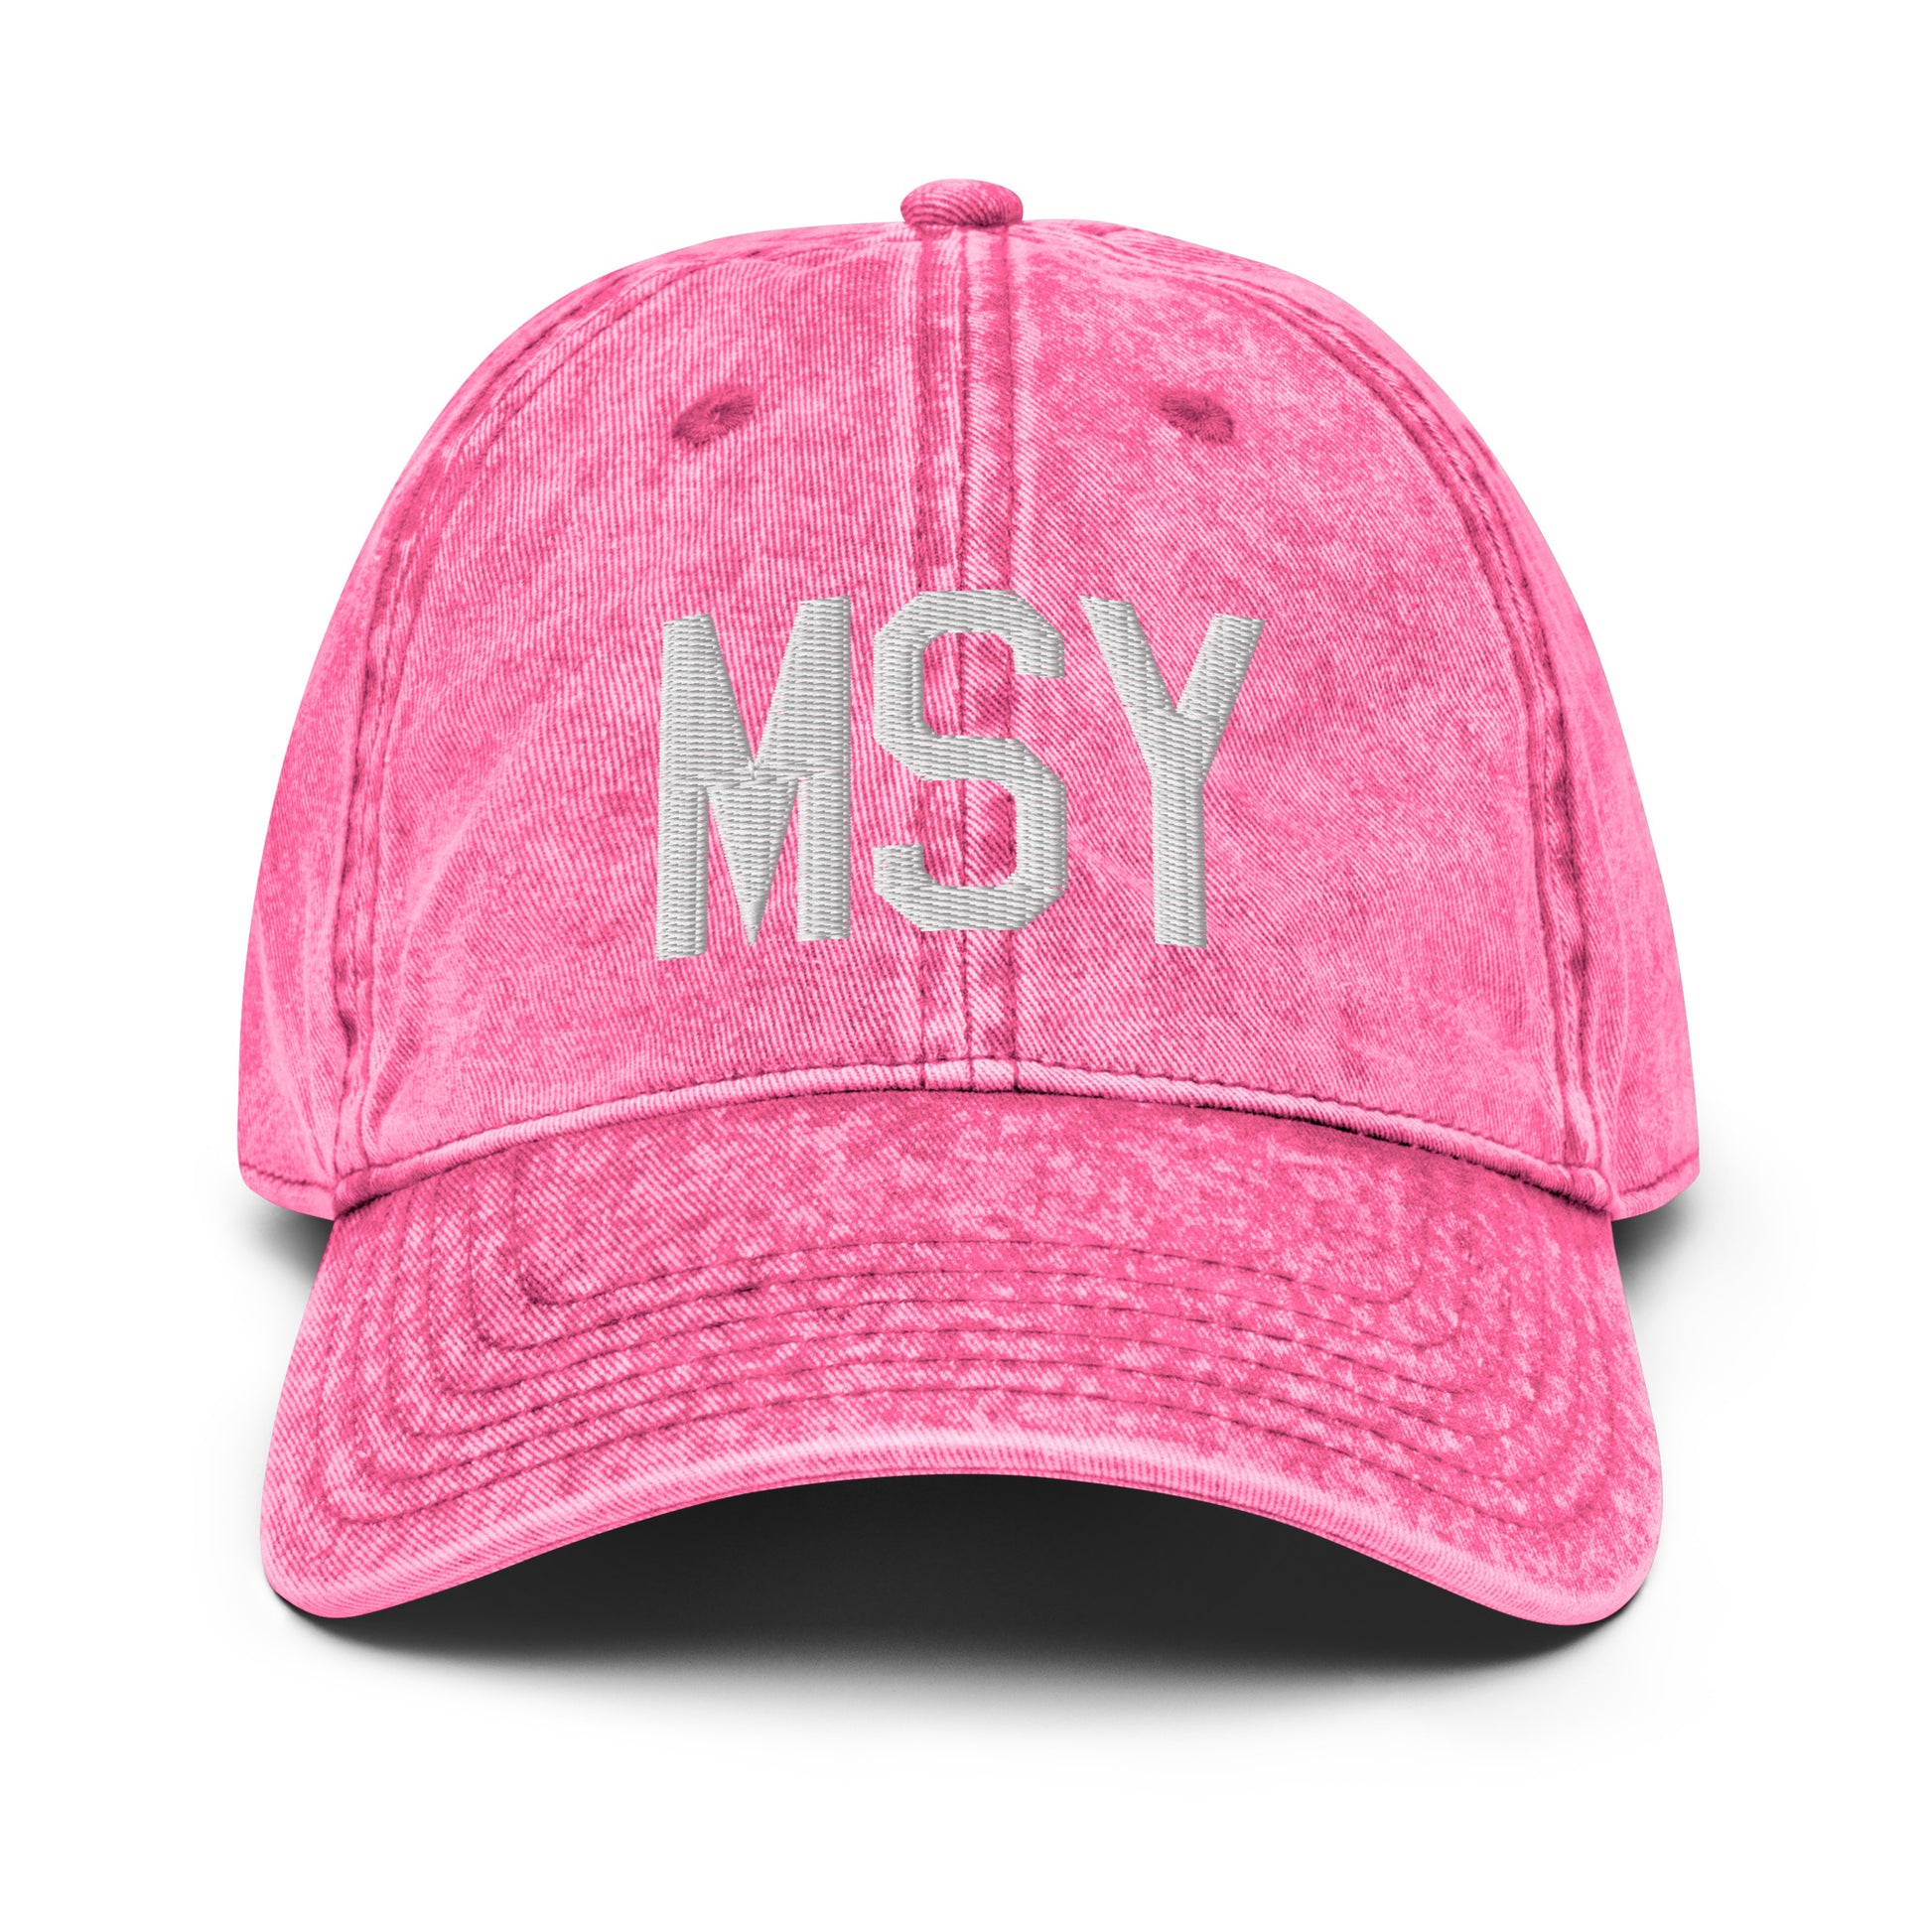 Airport Code Twill Cap - White • MSY New Orleans • YHM Designs - Image 25